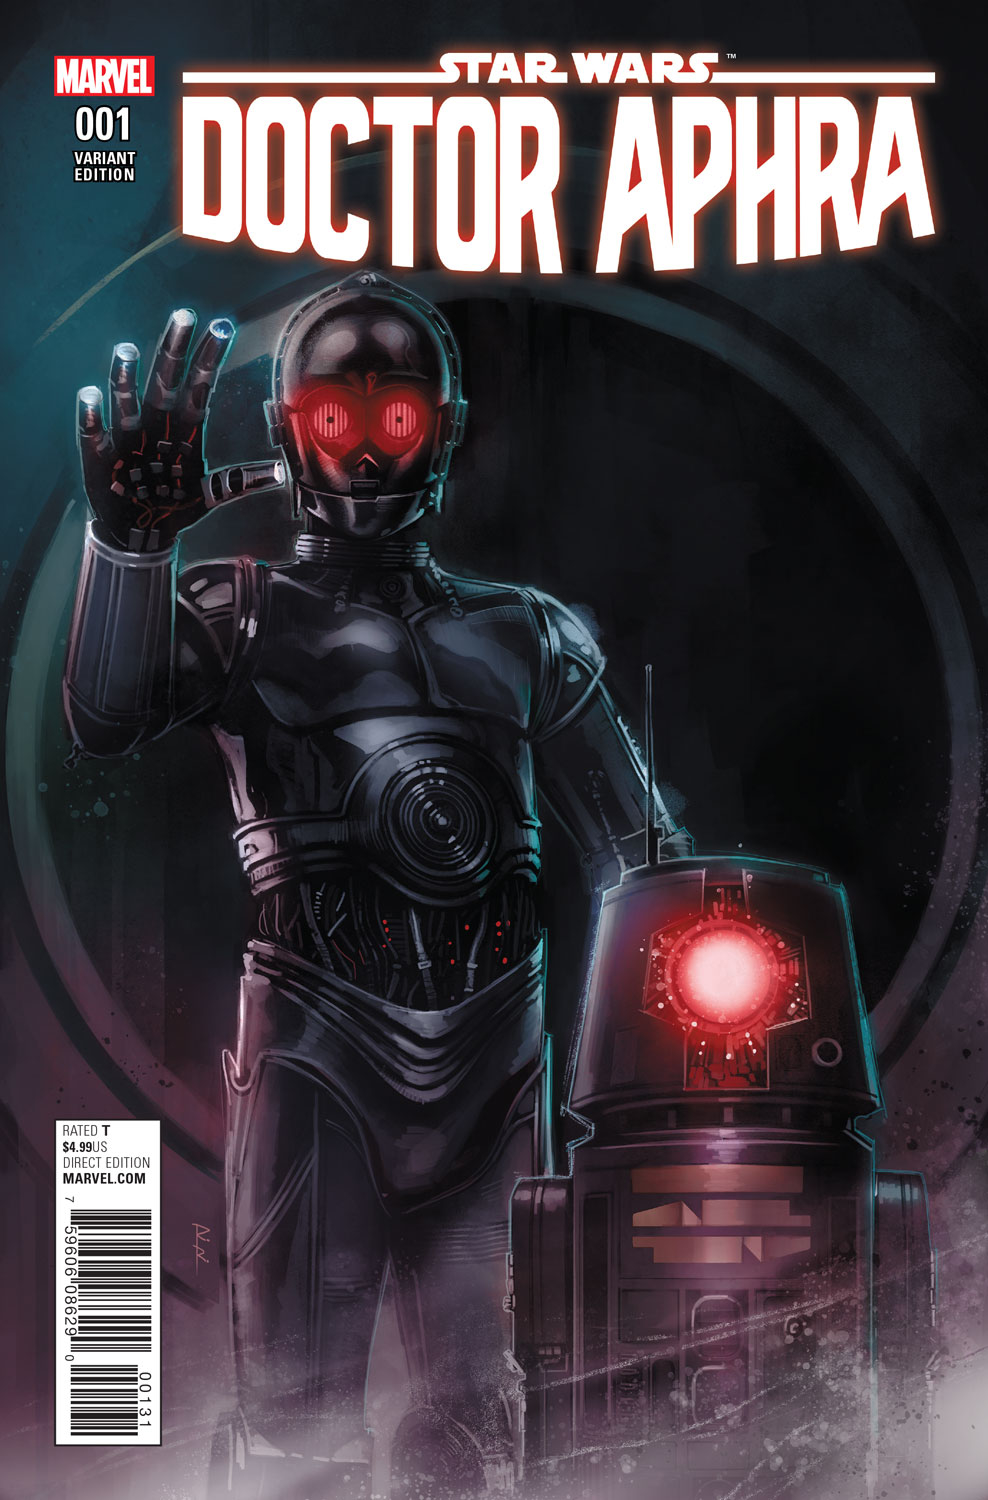 Doctor Aphra #1 (Rod Reis Droids Variant Cover) (07.12.2016)